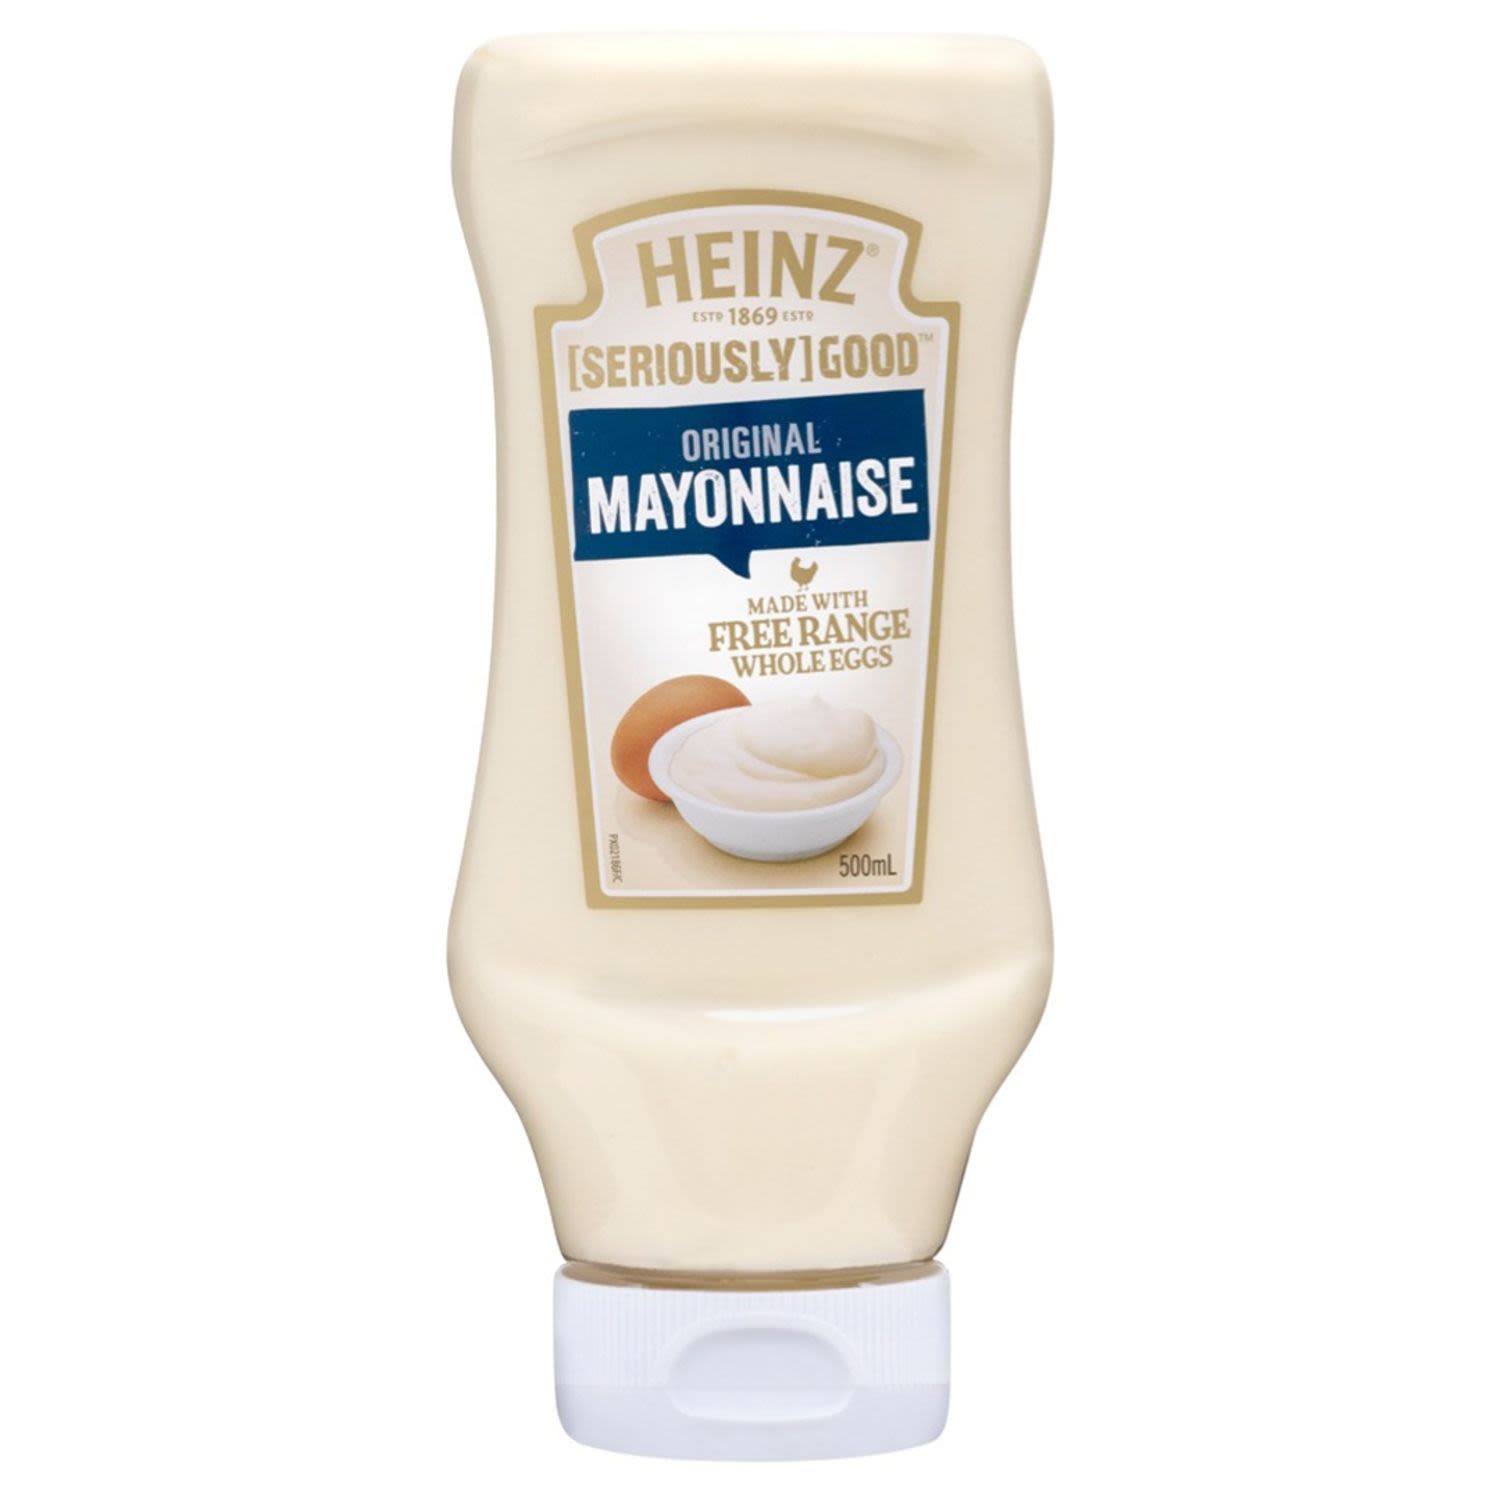 Heinz [Seriously] Good Original Squeezy Mayonnaise, 500 Millilitre